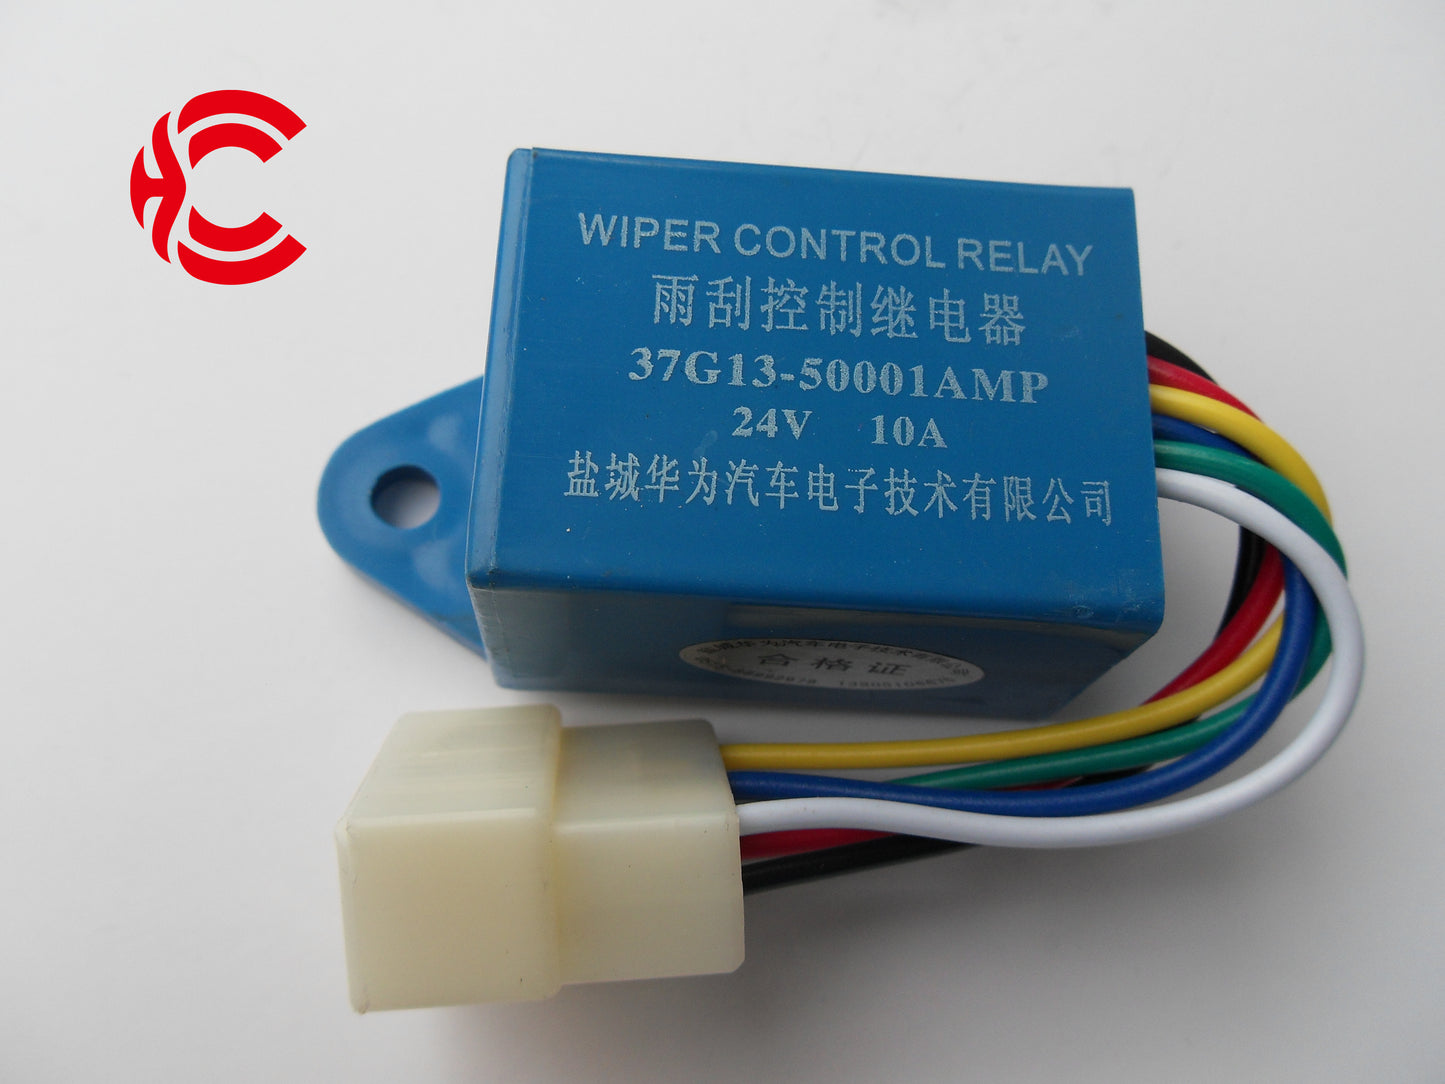 OEM: 37G13-50001AMPMaterial: ABS Color: black Origin: Made in ChinaWeight: 50gPacking List: 1* Wiper Intermittent Relay More ServiceWe can provide OEM Manufacturing serviceWe can Be your one-step solution for Auto PartsWe can provide technical scheme for you Feel Free to Contact Us, We will get back to you as soon as possible.